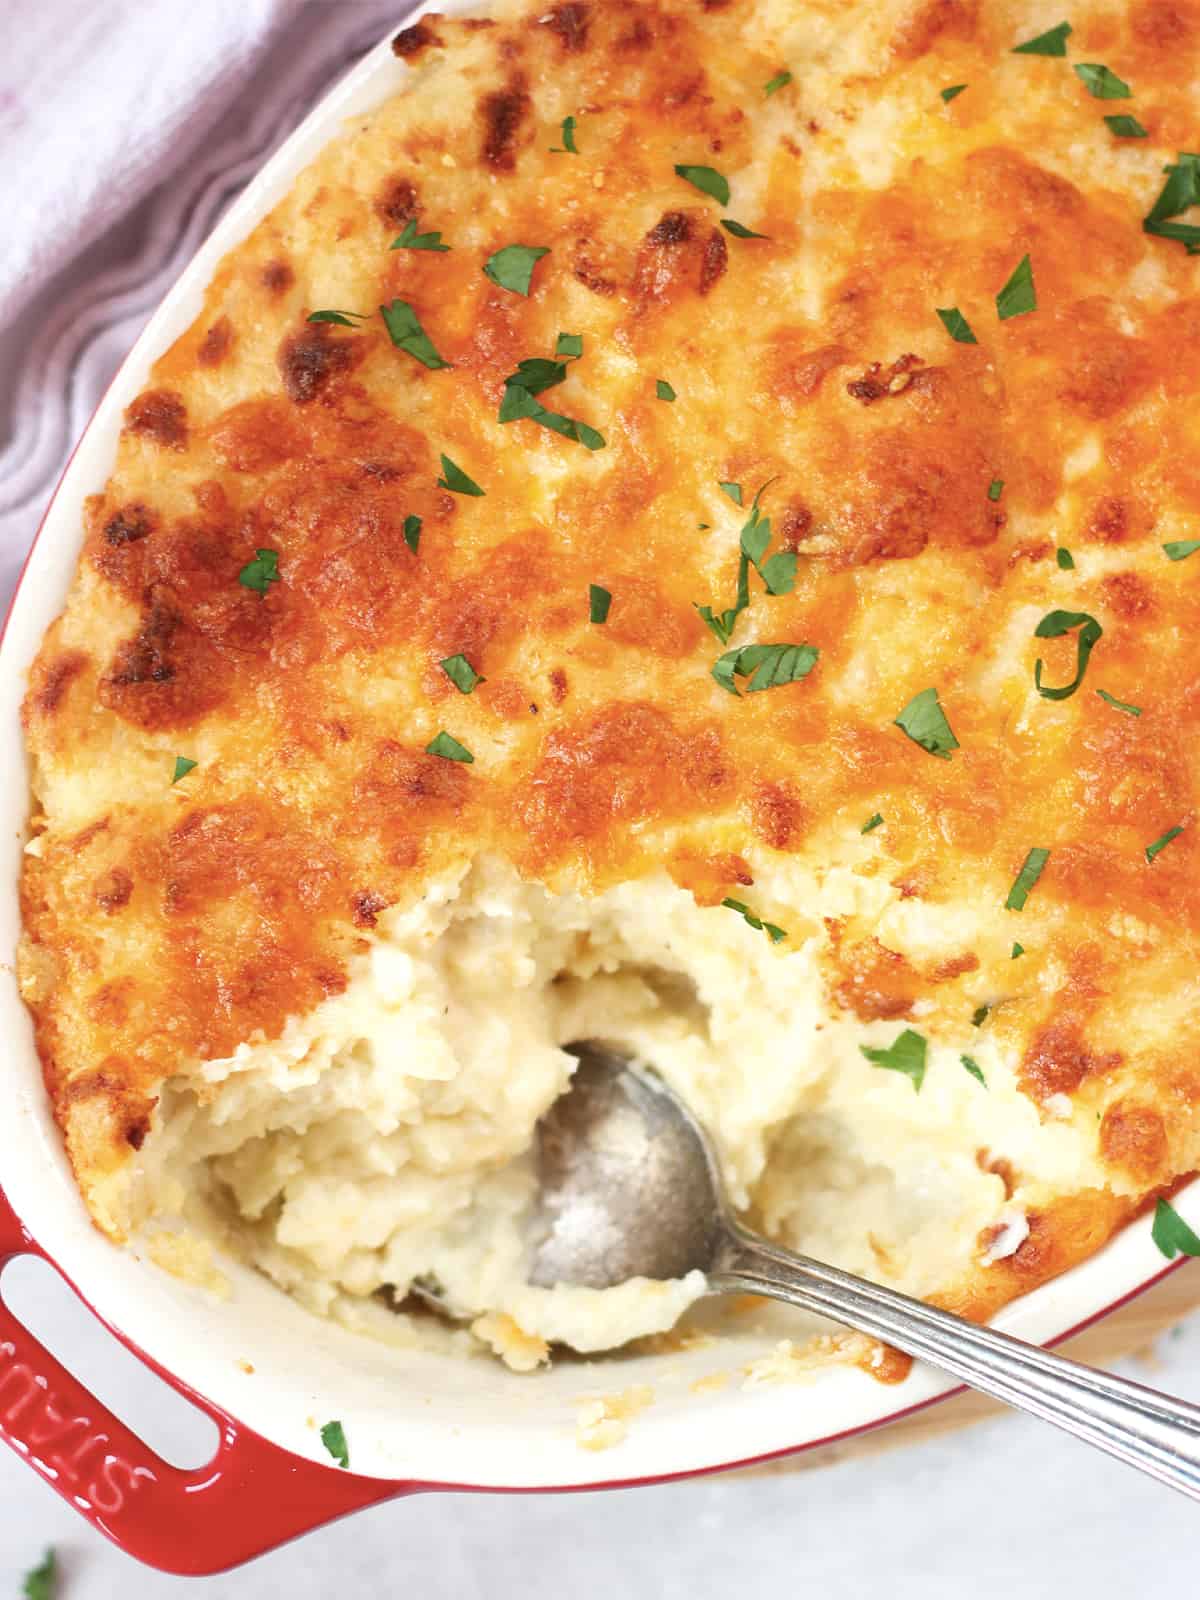 A spoon in a twice baked mashed potato casserole topped with cheese.